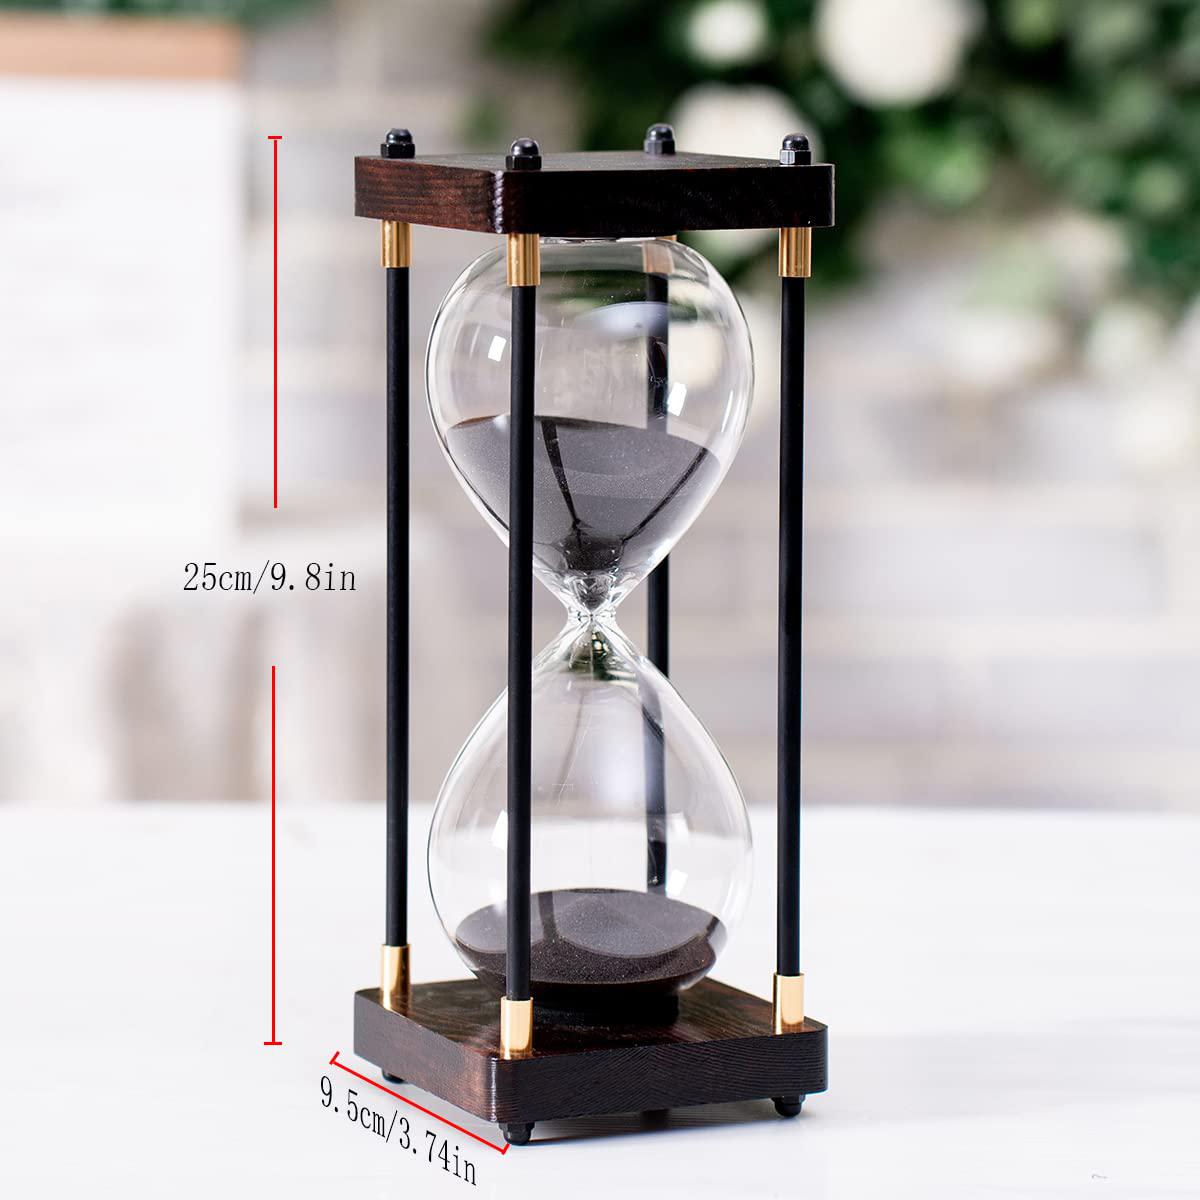 lmzxmcy 60 minutes hourglass sand timers,large sand timer, decorative quiet time clock for men/women, vintage wooden hour glass timer